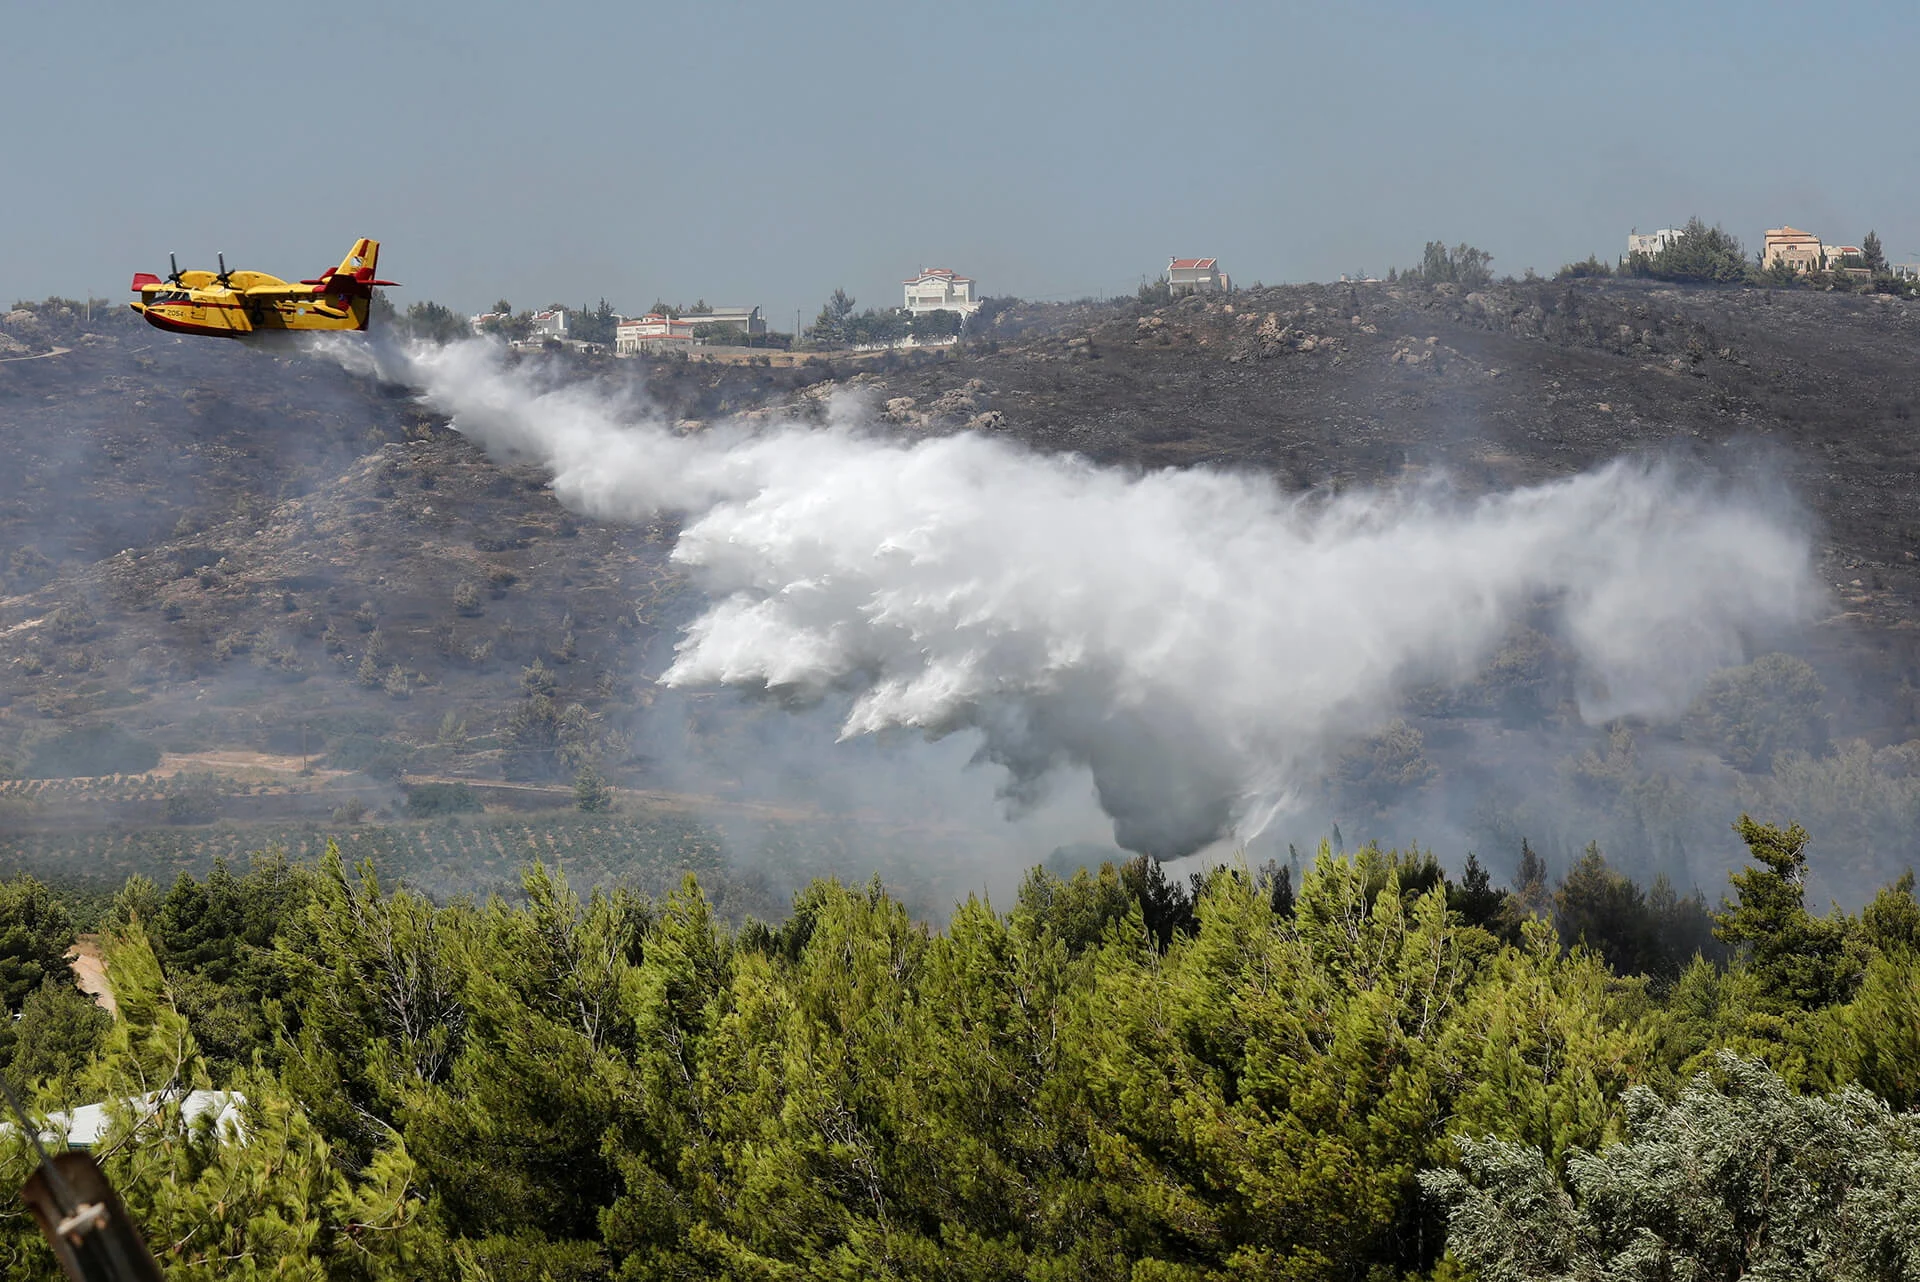 A Canadair aircraft makes a water drop as a wildfire burns in the Pikermi suburb of Athens, Greece, on July 20, 2022. (REUTERS/ Louiza Vradi)